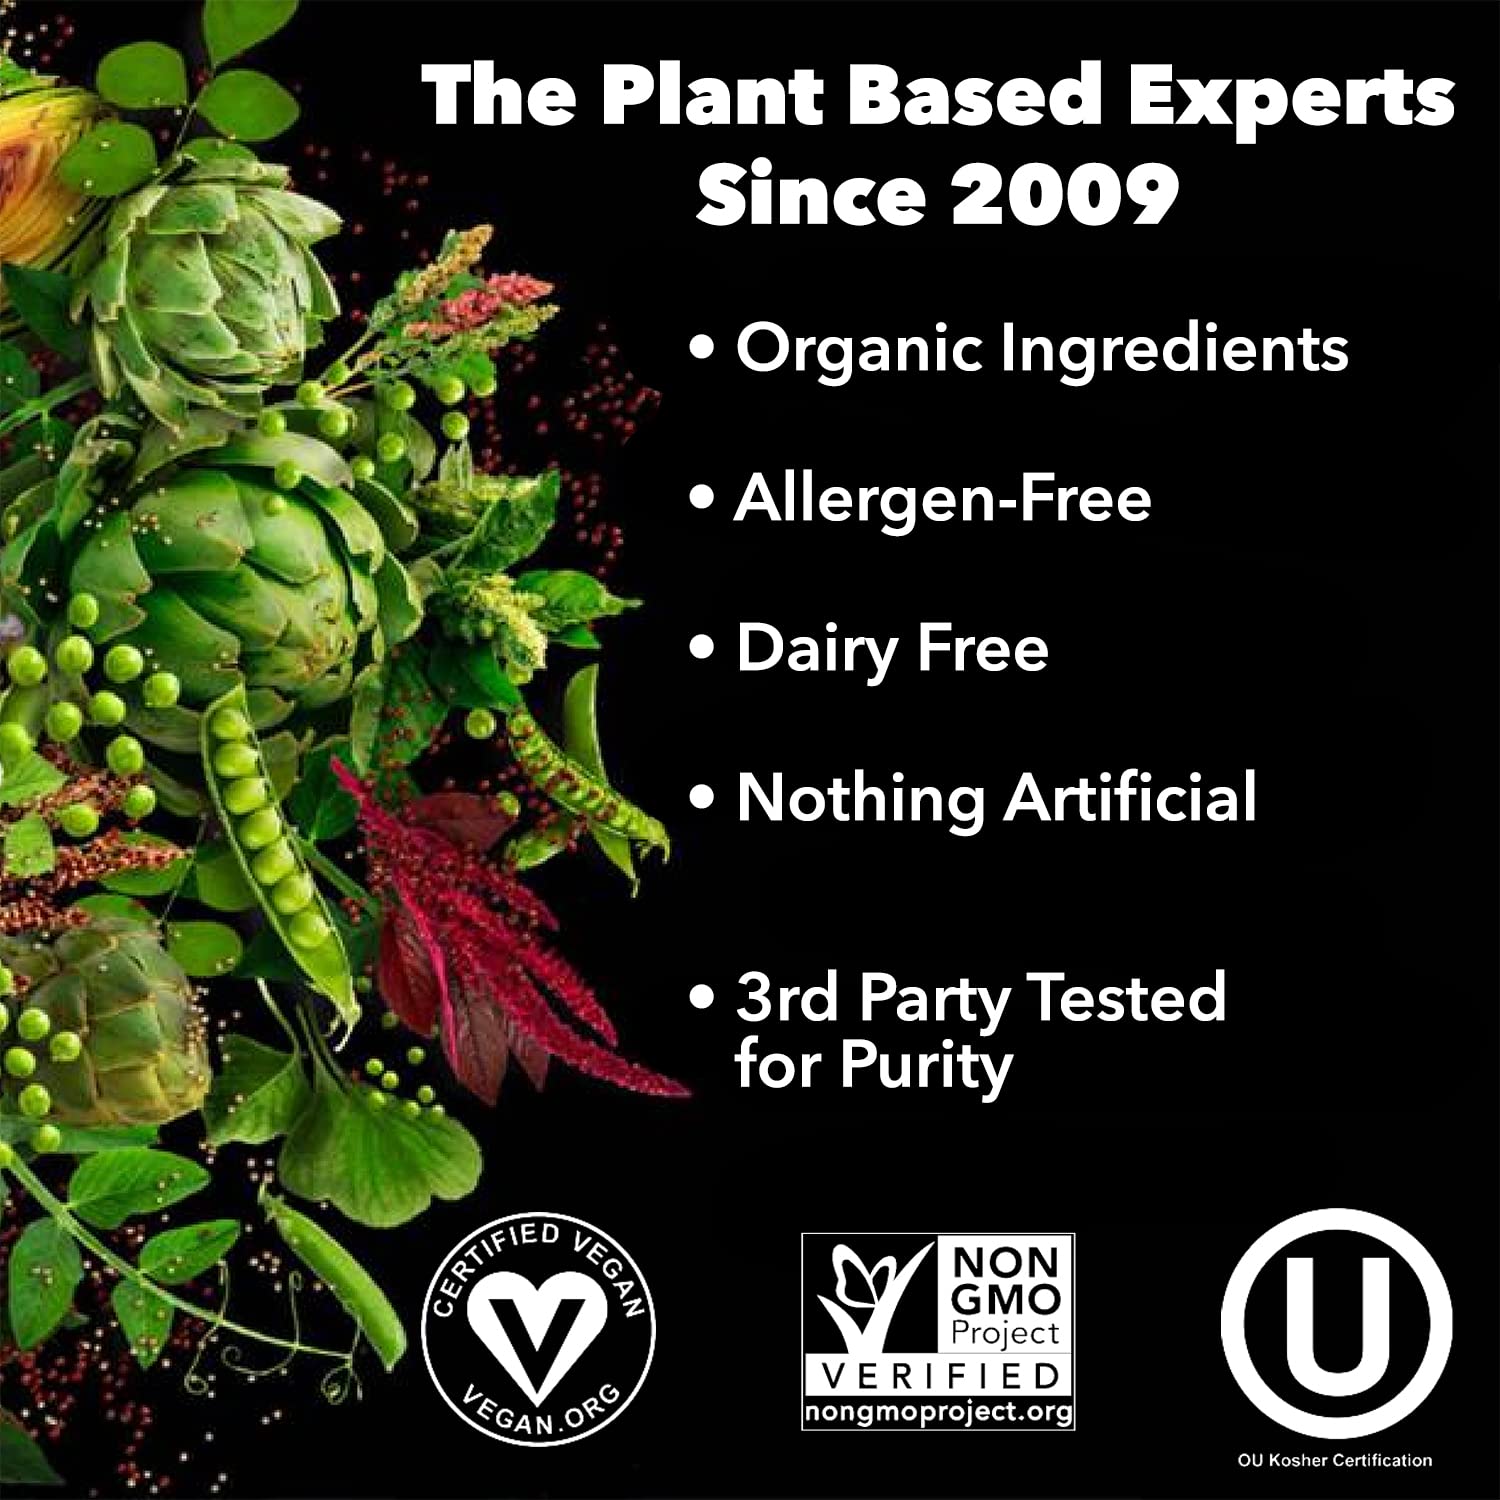 PlantFusion Complete Vegan Protein Powder - Plant Based Protein Powder with BCAAs, Digestive Enzymes and Pea Protein - Keto, Gluten Free, Soy Free, Non-Dairy, No Sugar, Non-GMO - Chocolate 1lb